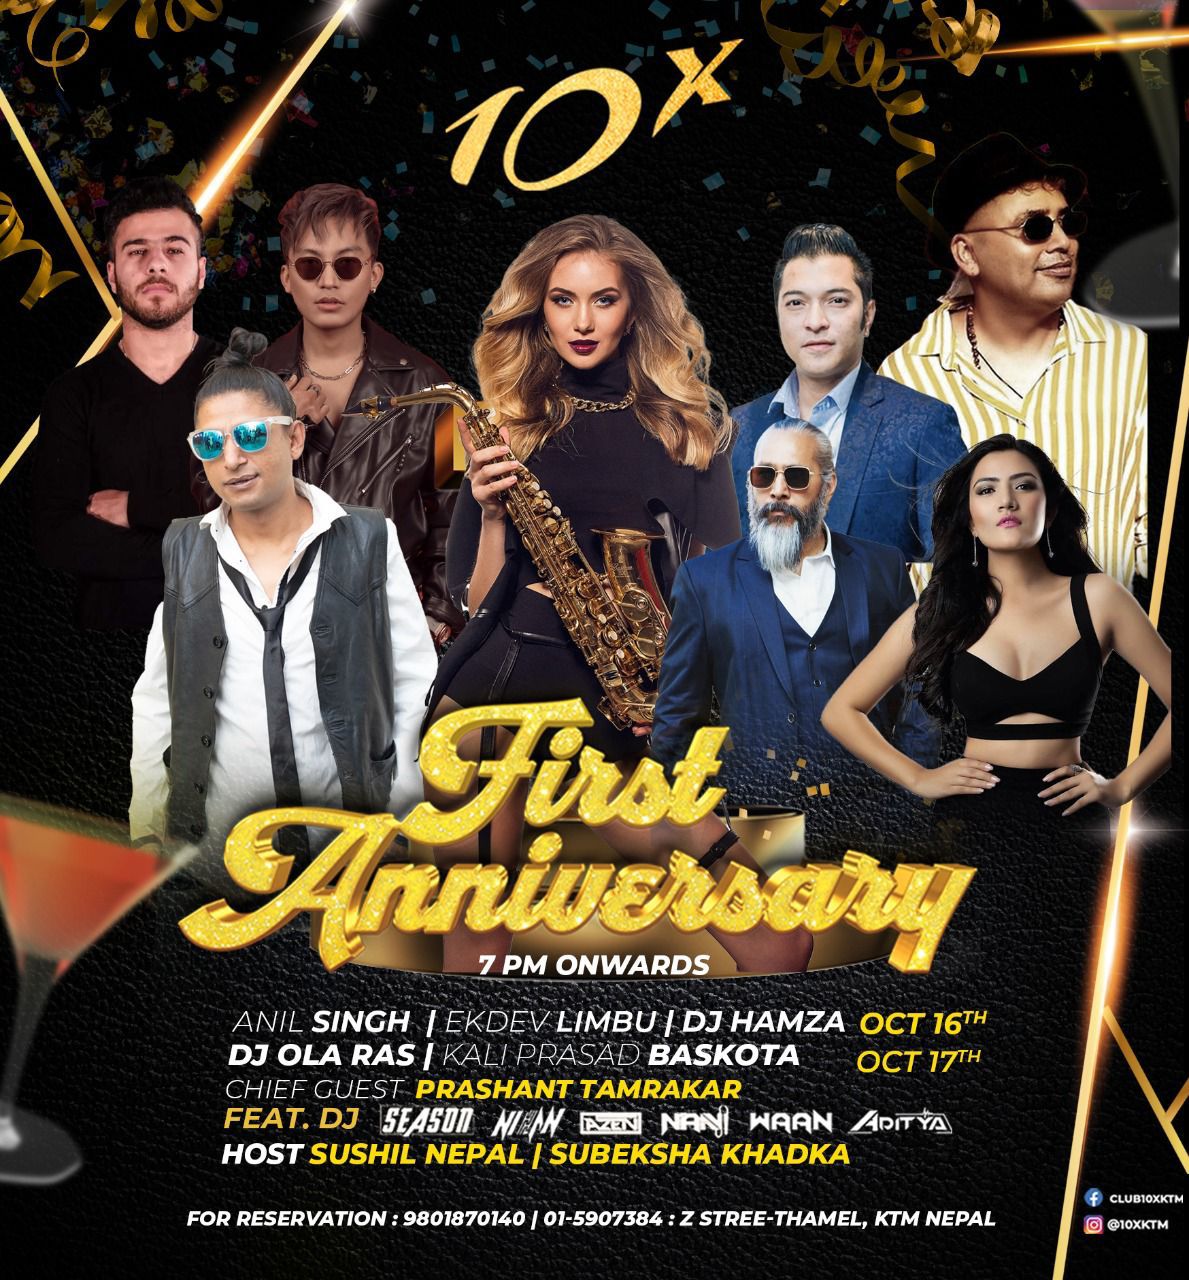 Club 10x celebrating its first anniversary, join them on Oct 16, 17